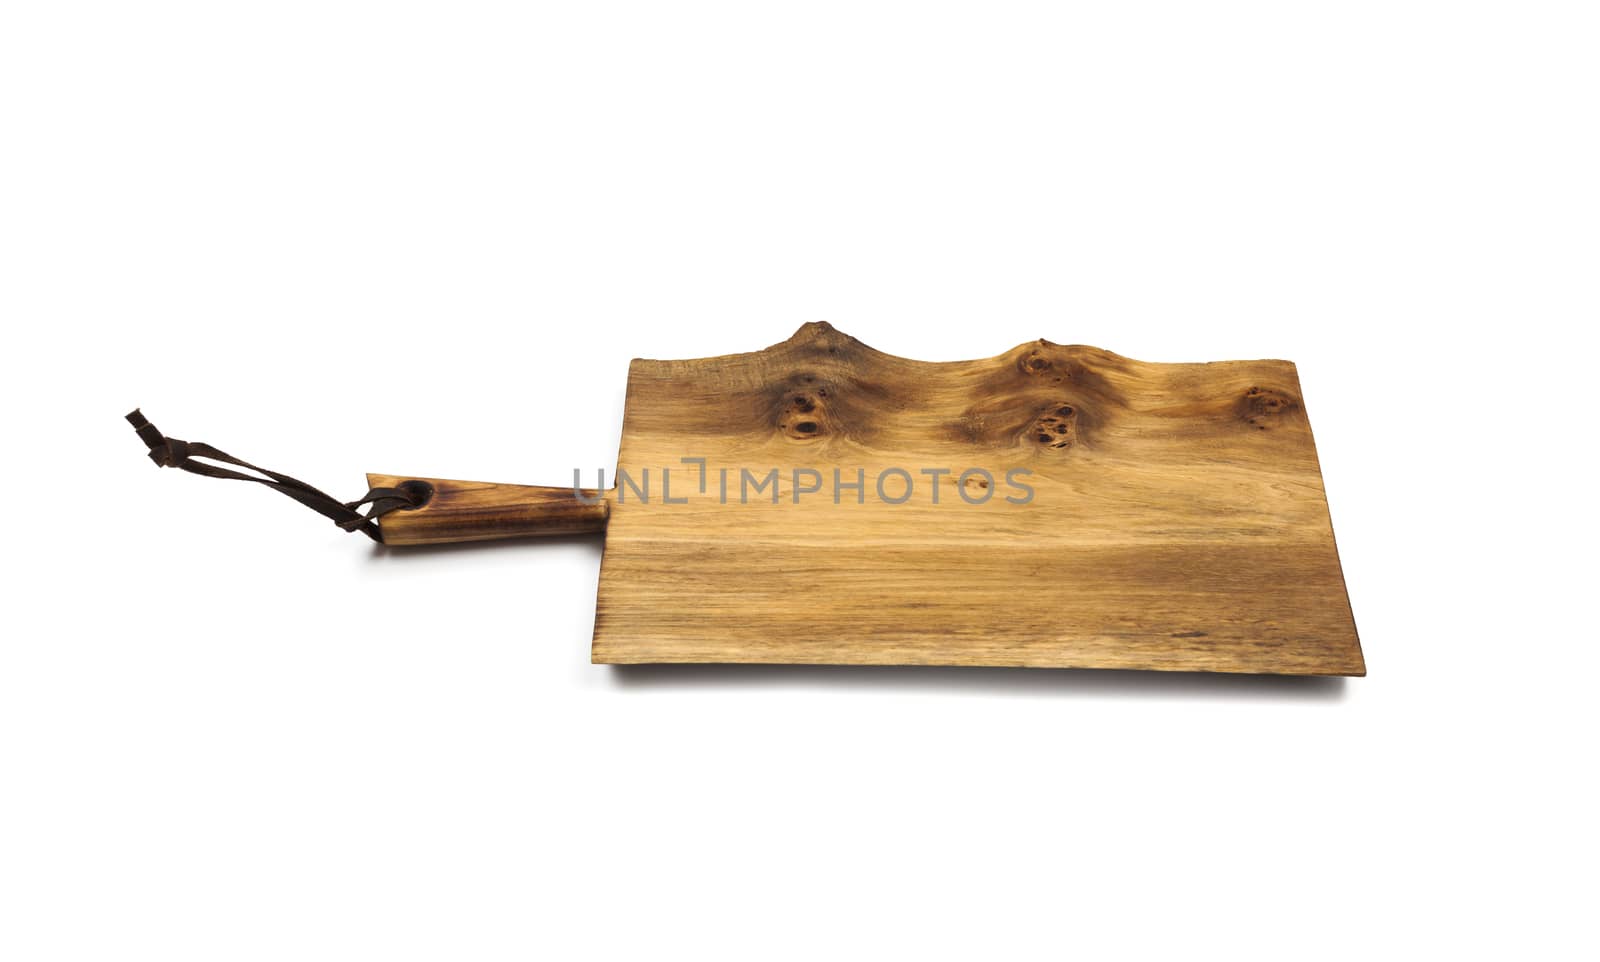 Surface of the old wooden planks kitchen board with leather strap, isolated on white background